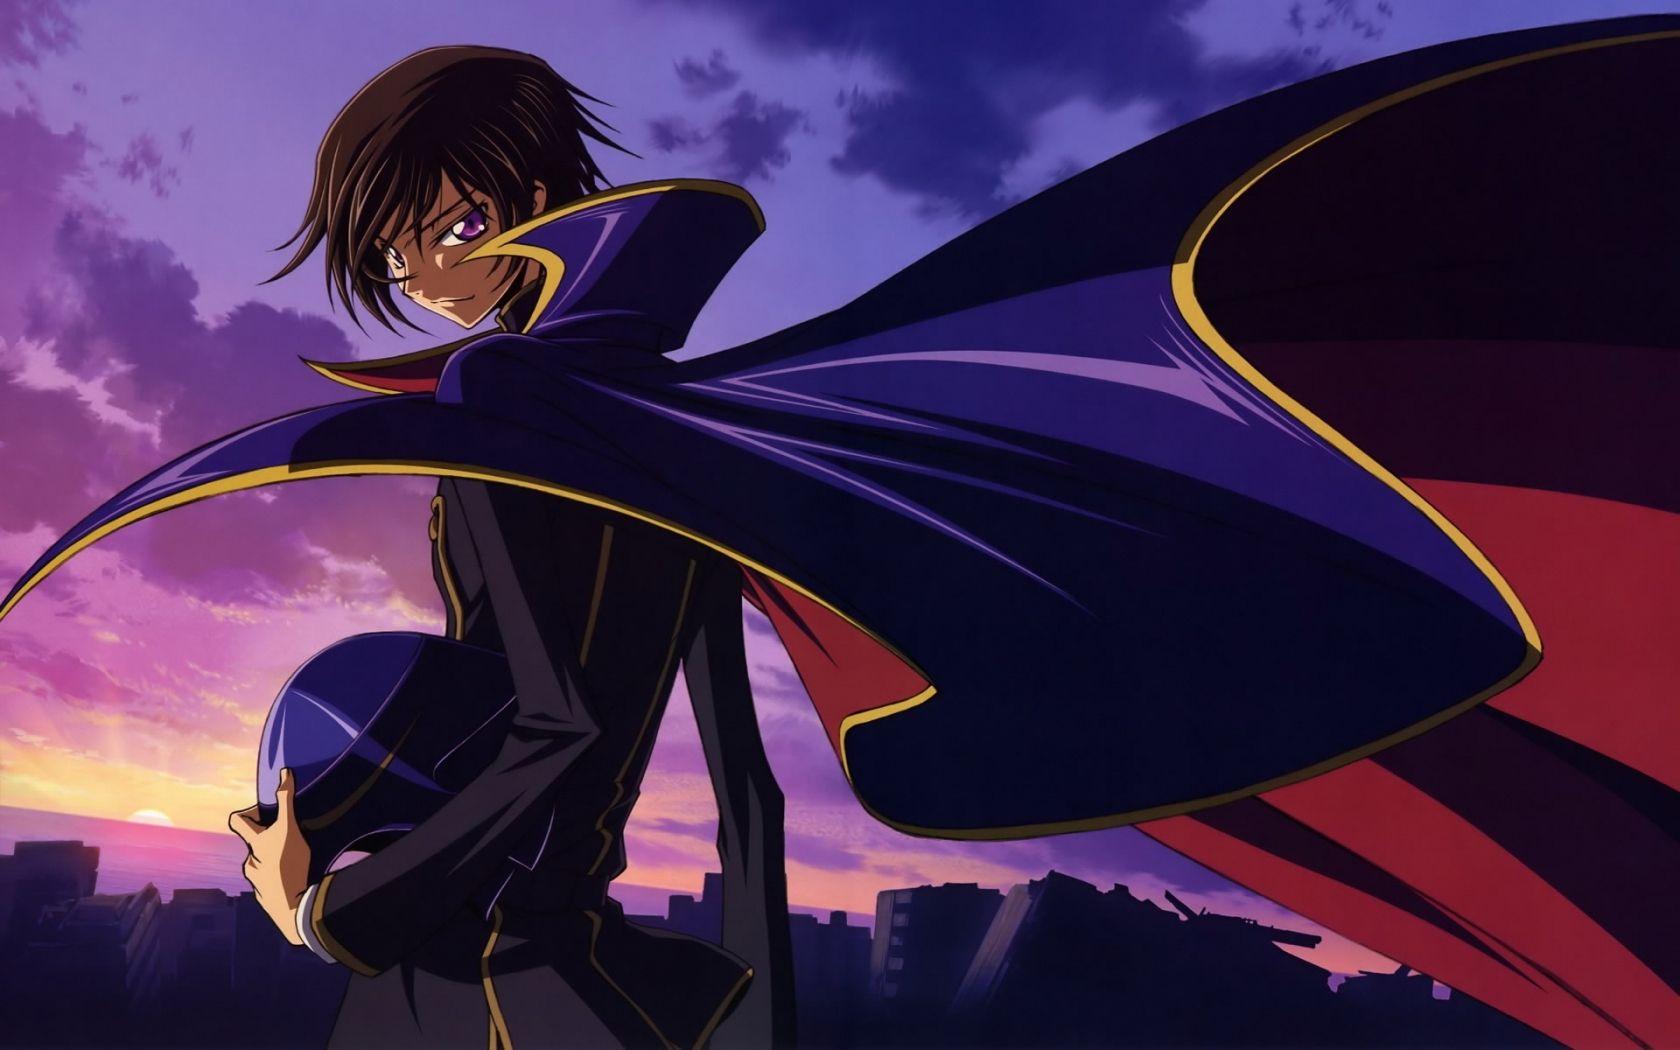 Free download Code Geass Wallpaper Anime Clamp Wallpaper [1920x1200] for your Desktop, Mobile & Tablet. Explore Code Geass Wallpaper for Desktop. Code Geass Wallpaper HD, Code Geass Wallpaper iPhone